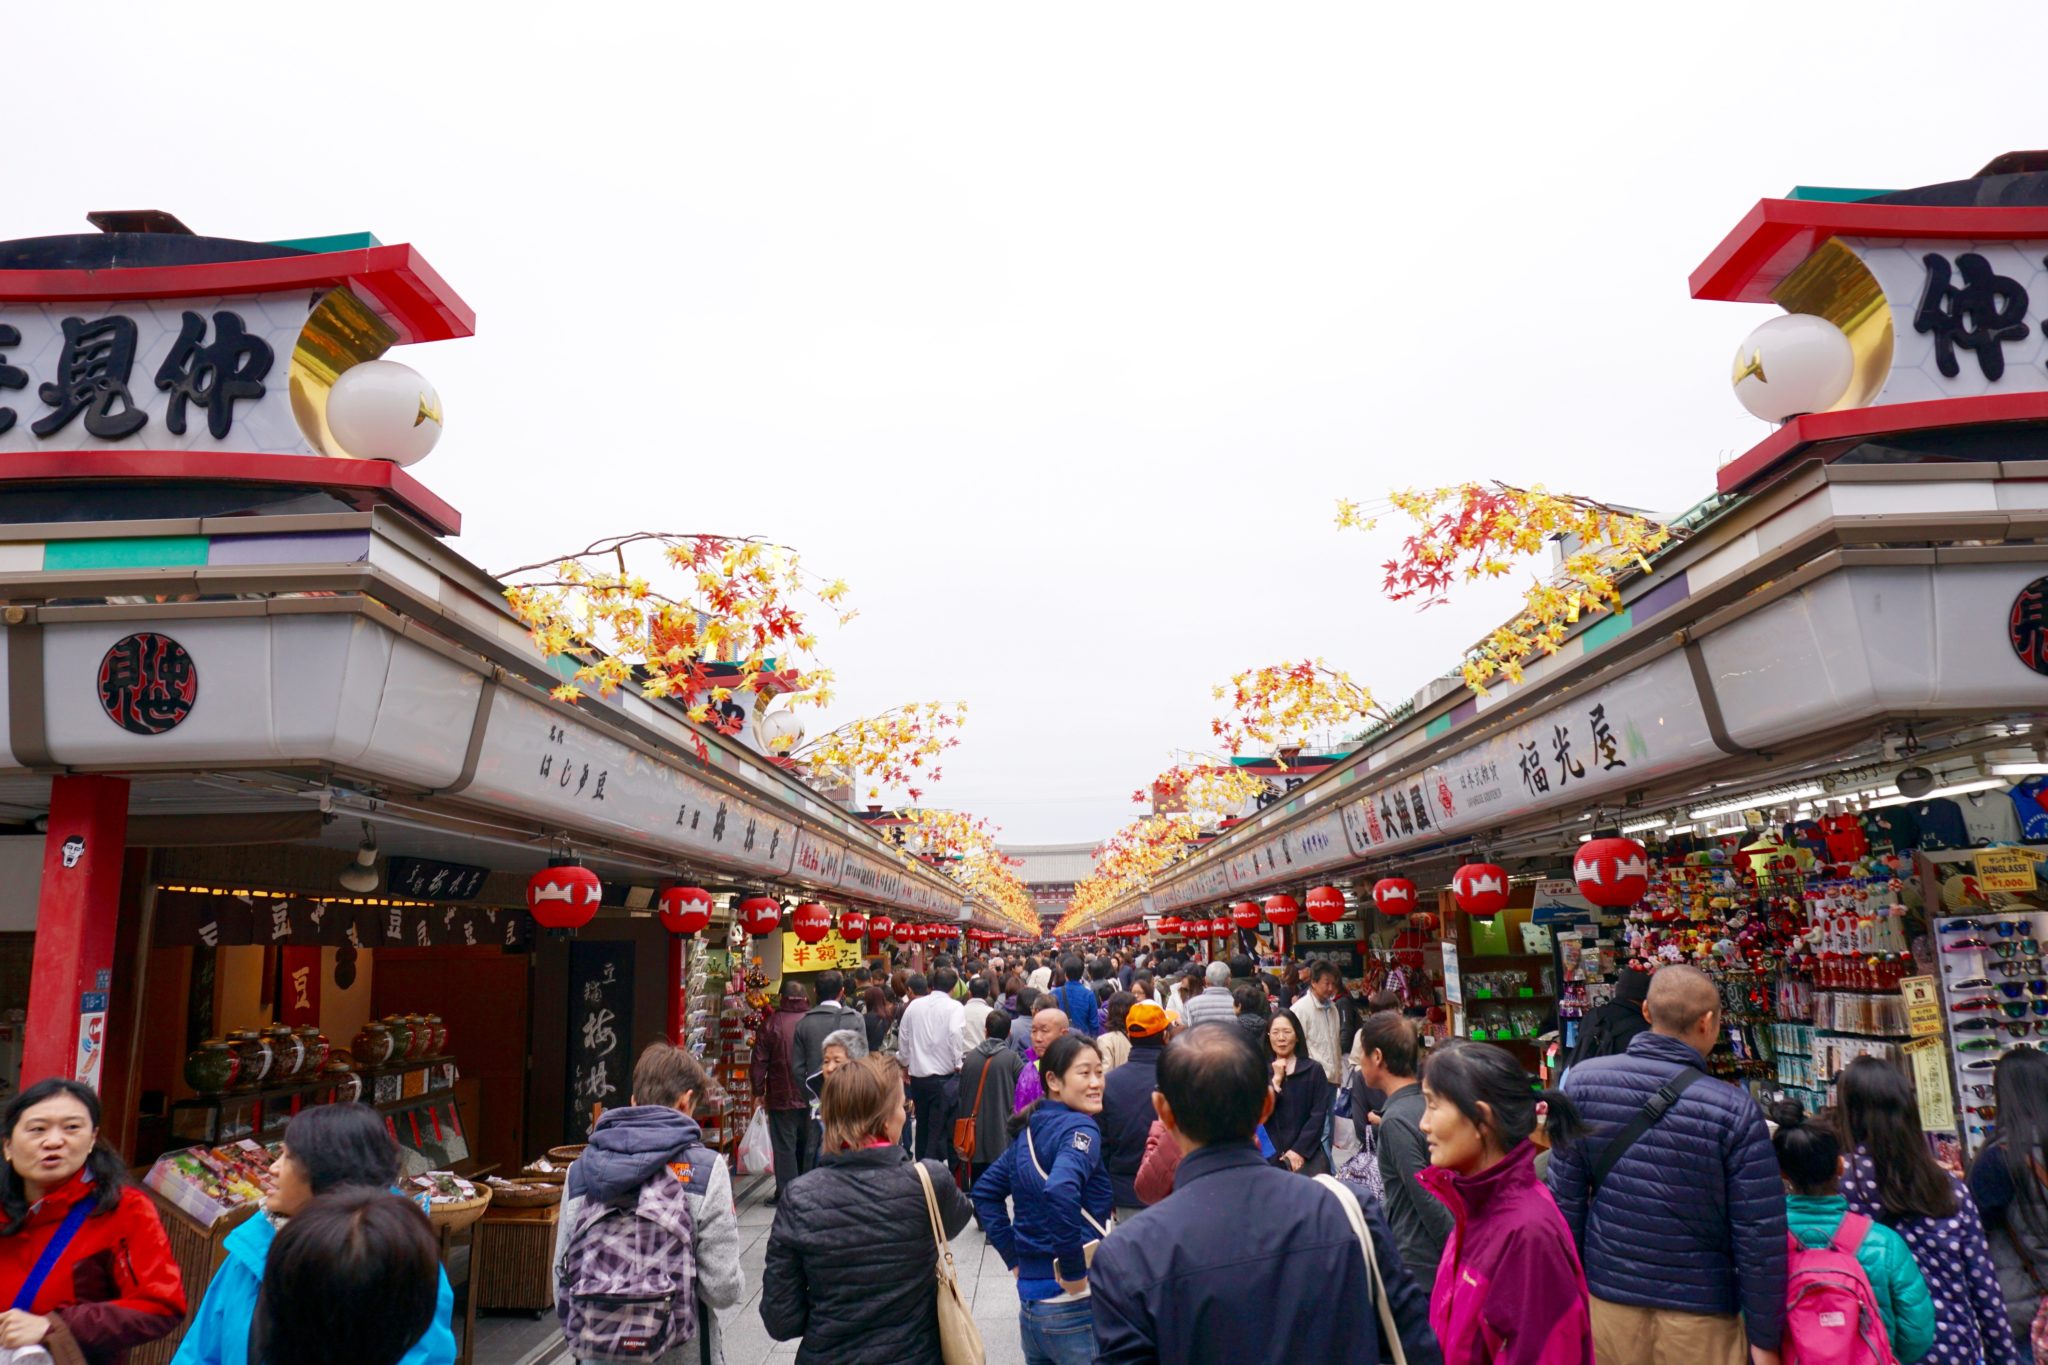 Best Japanese Souvenirs to Buy at Asakusa Market in Tokyo